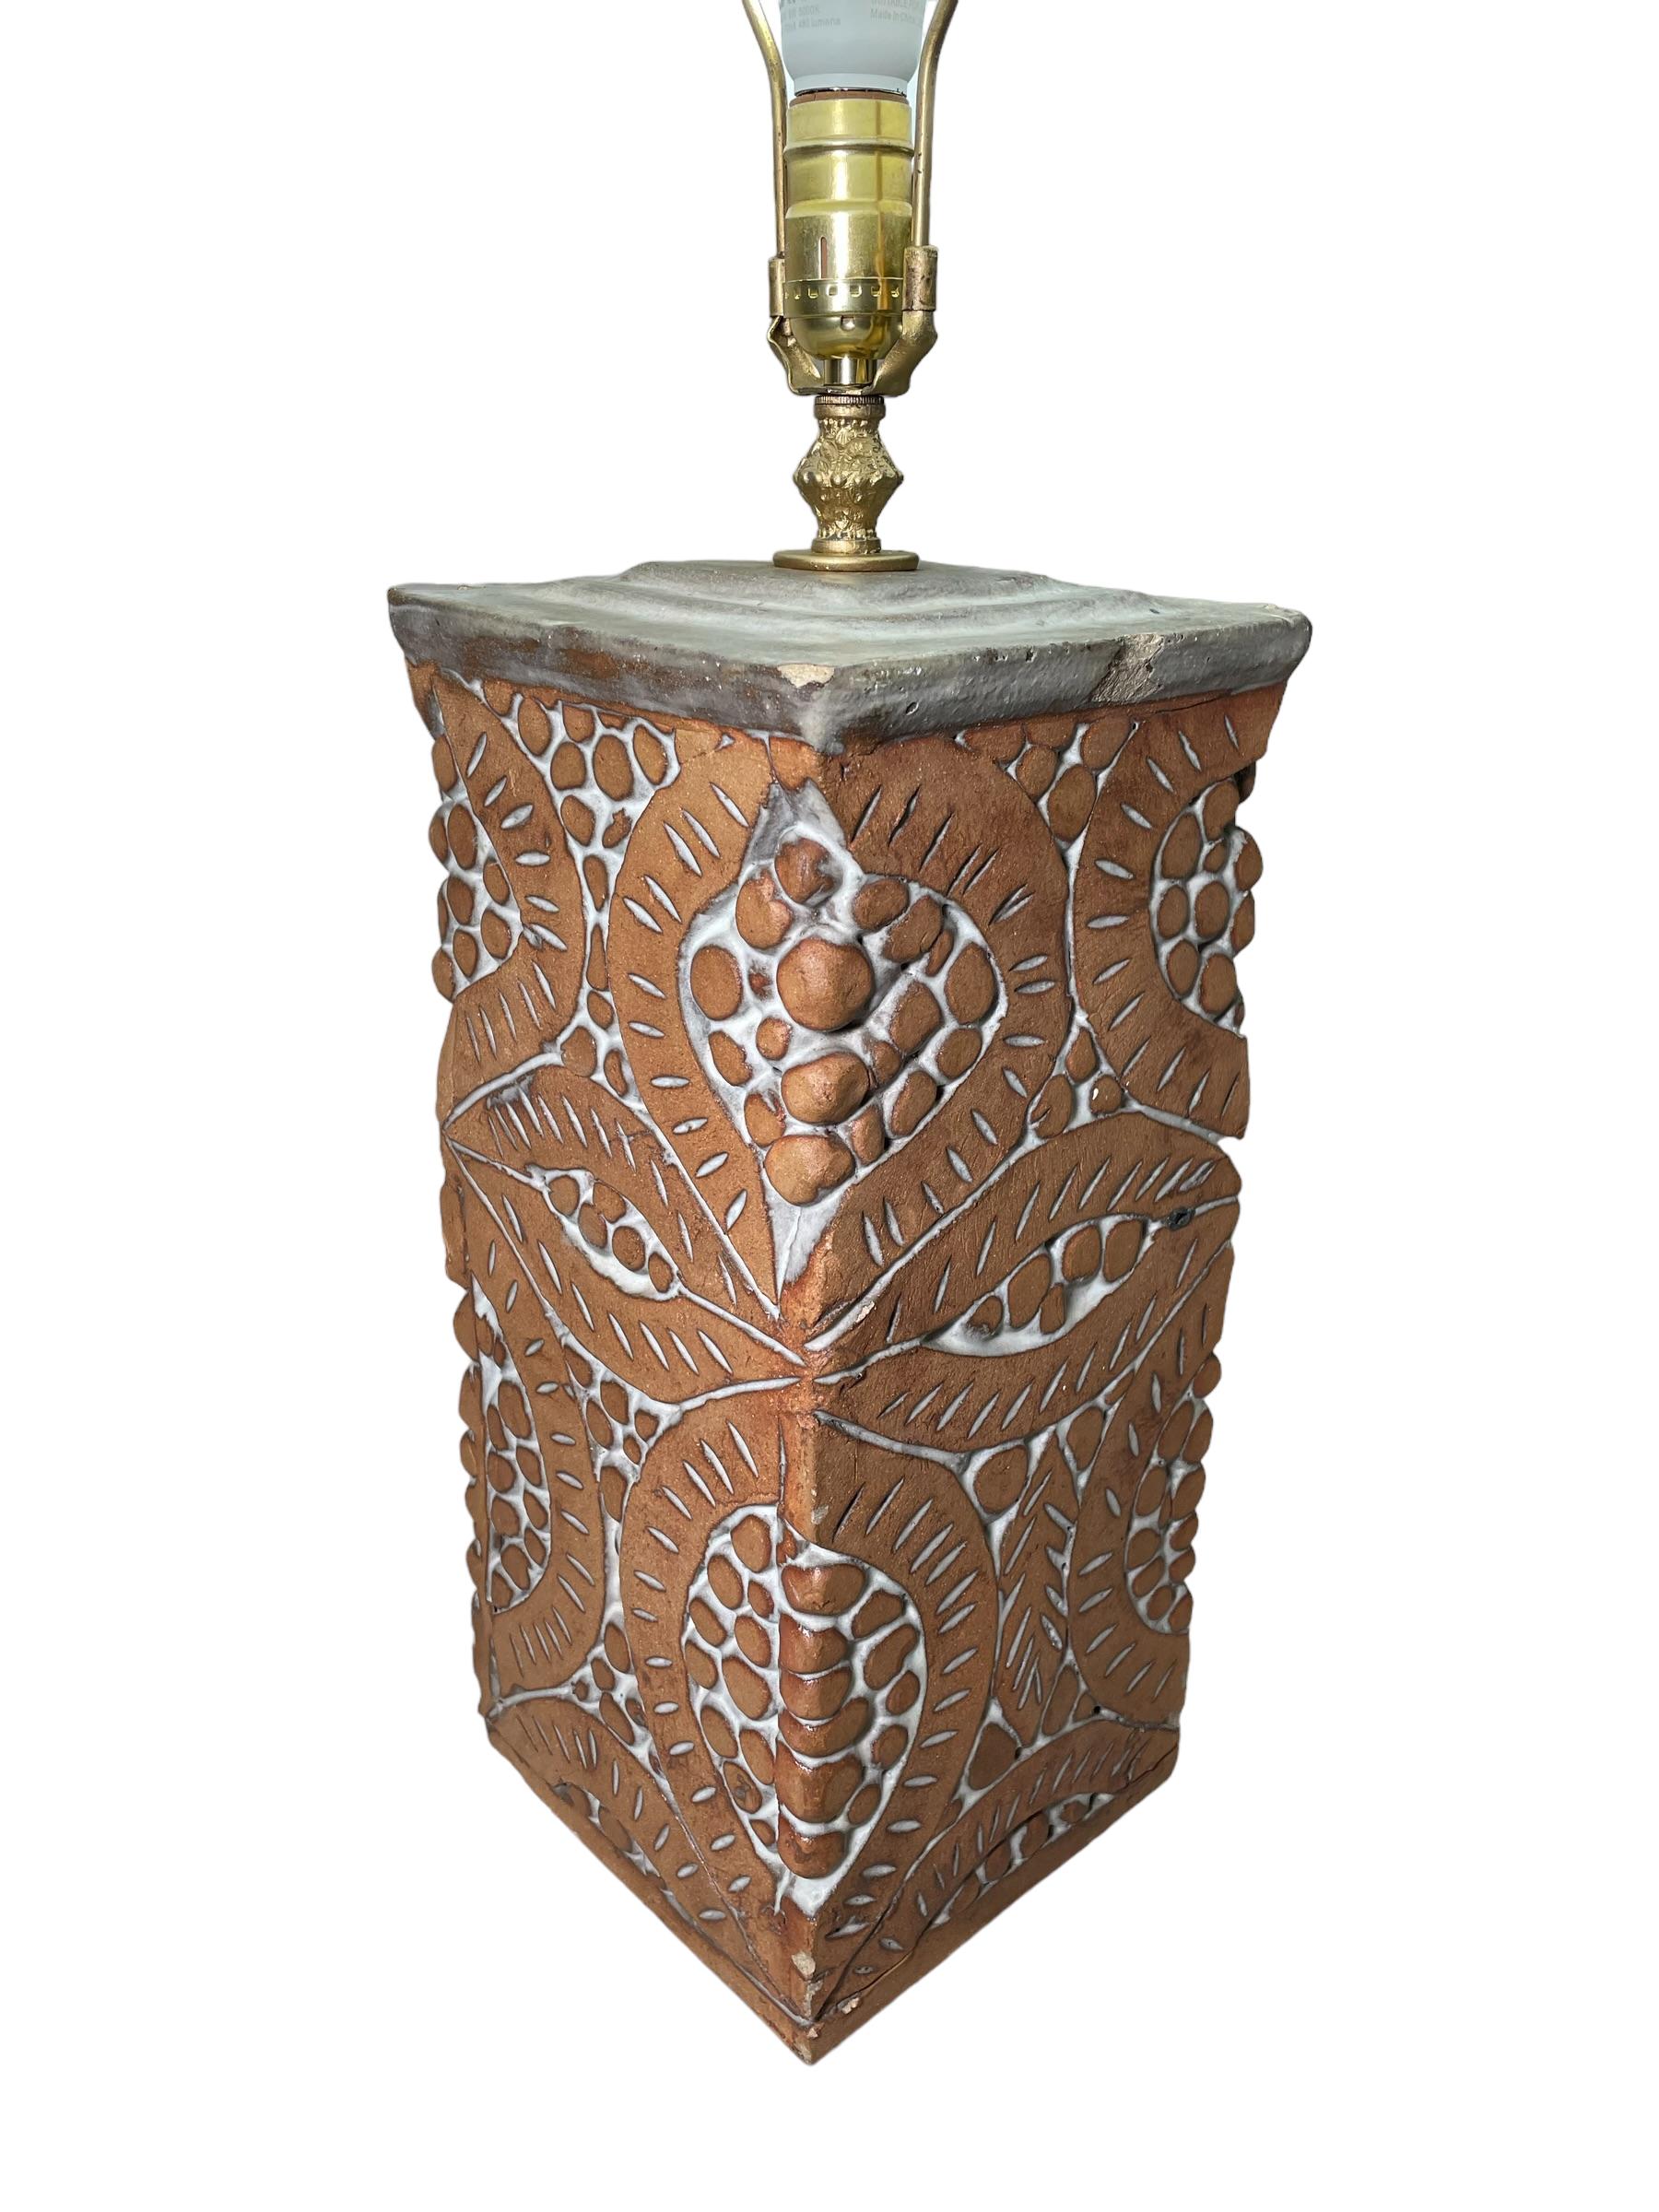 Isla Del Sol Table Lamp In Good Condition For Sale In Guaynabo, PR